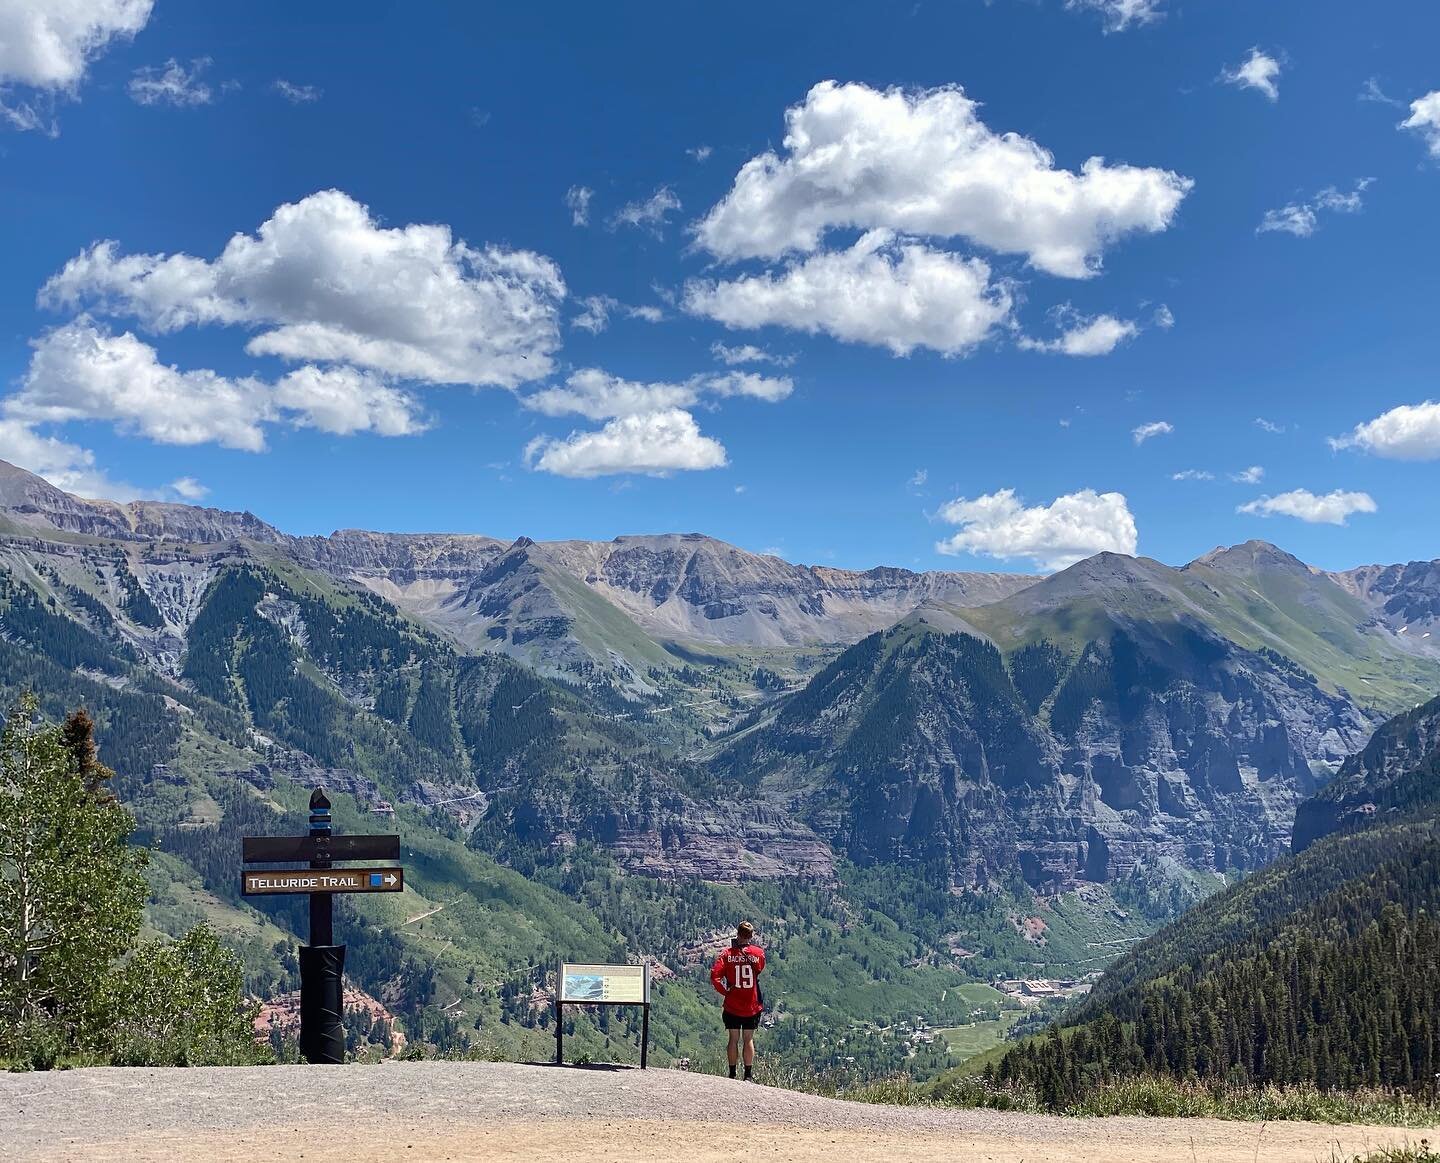 Telluride Trip Pros...
The Views &amp; Family ❤️

Telluride Trip Cons...
Two flat tires on off-road trail and hitchhiking 30 miles back to town 😅
.
.
#telluride #cohiking